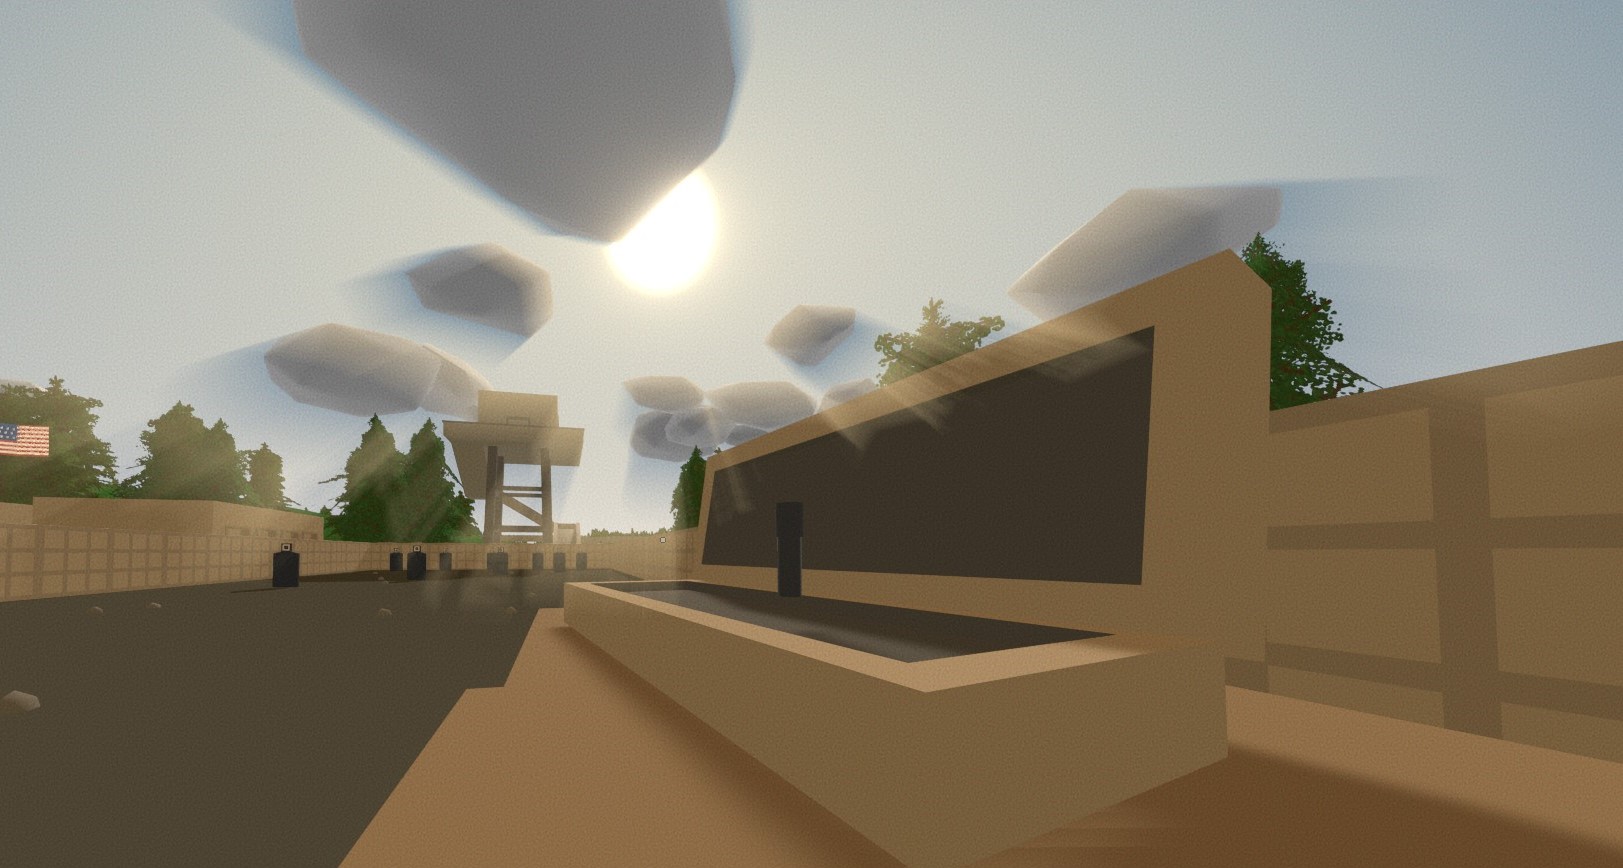 Unturned Tactical Attachements Uses